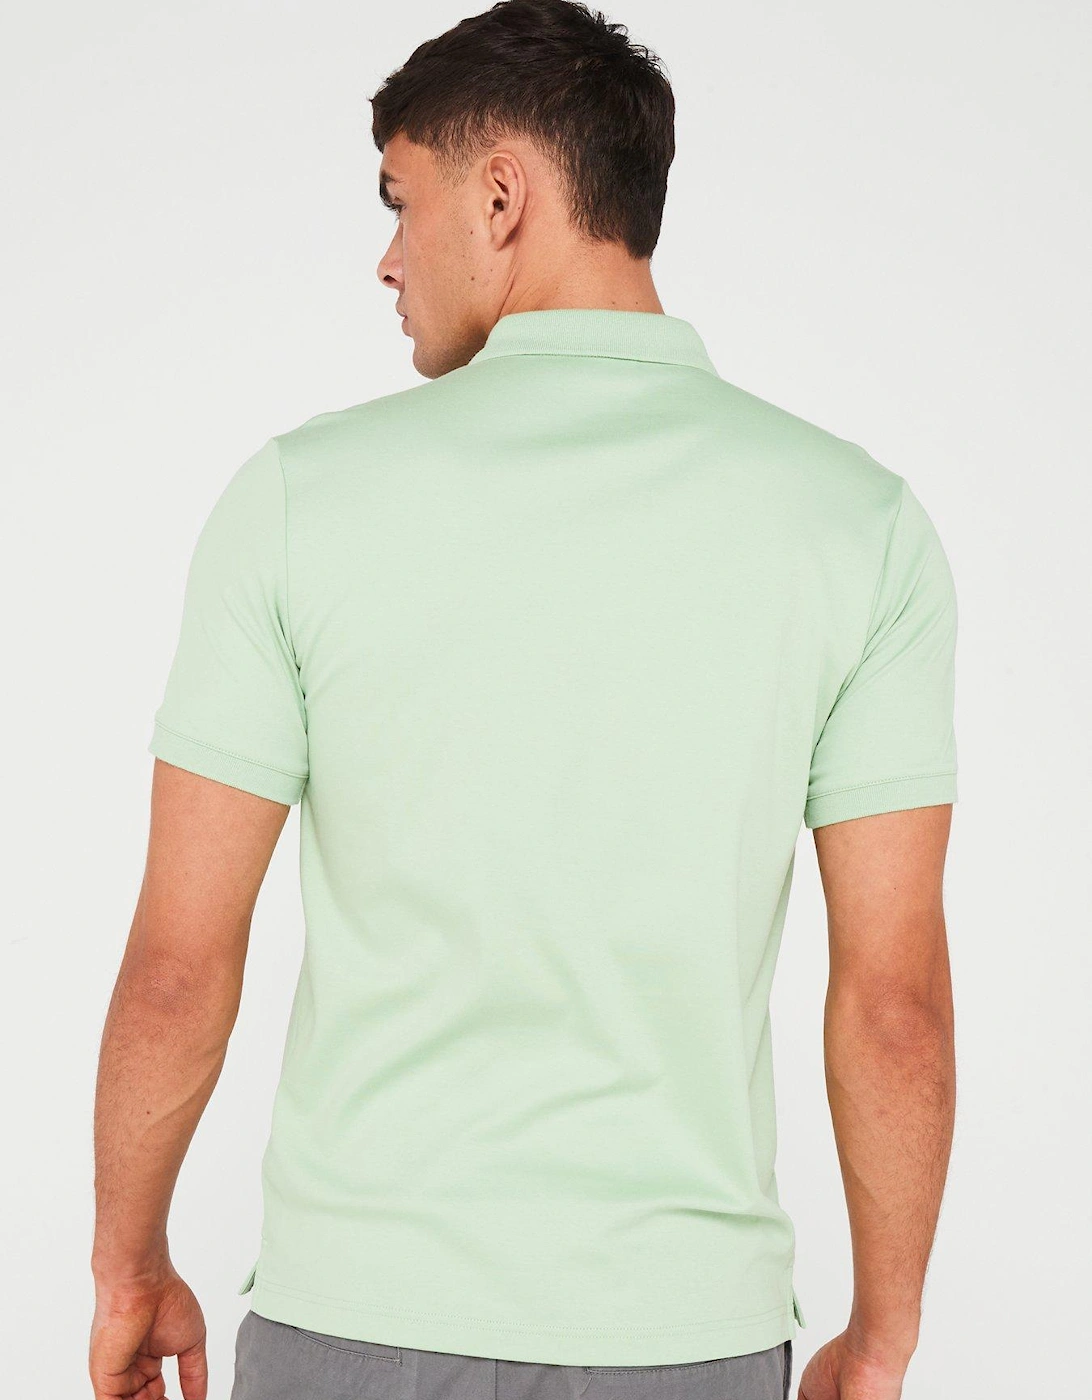 Smooth Cotton Slim Fit Polo Shirt - Light Green 